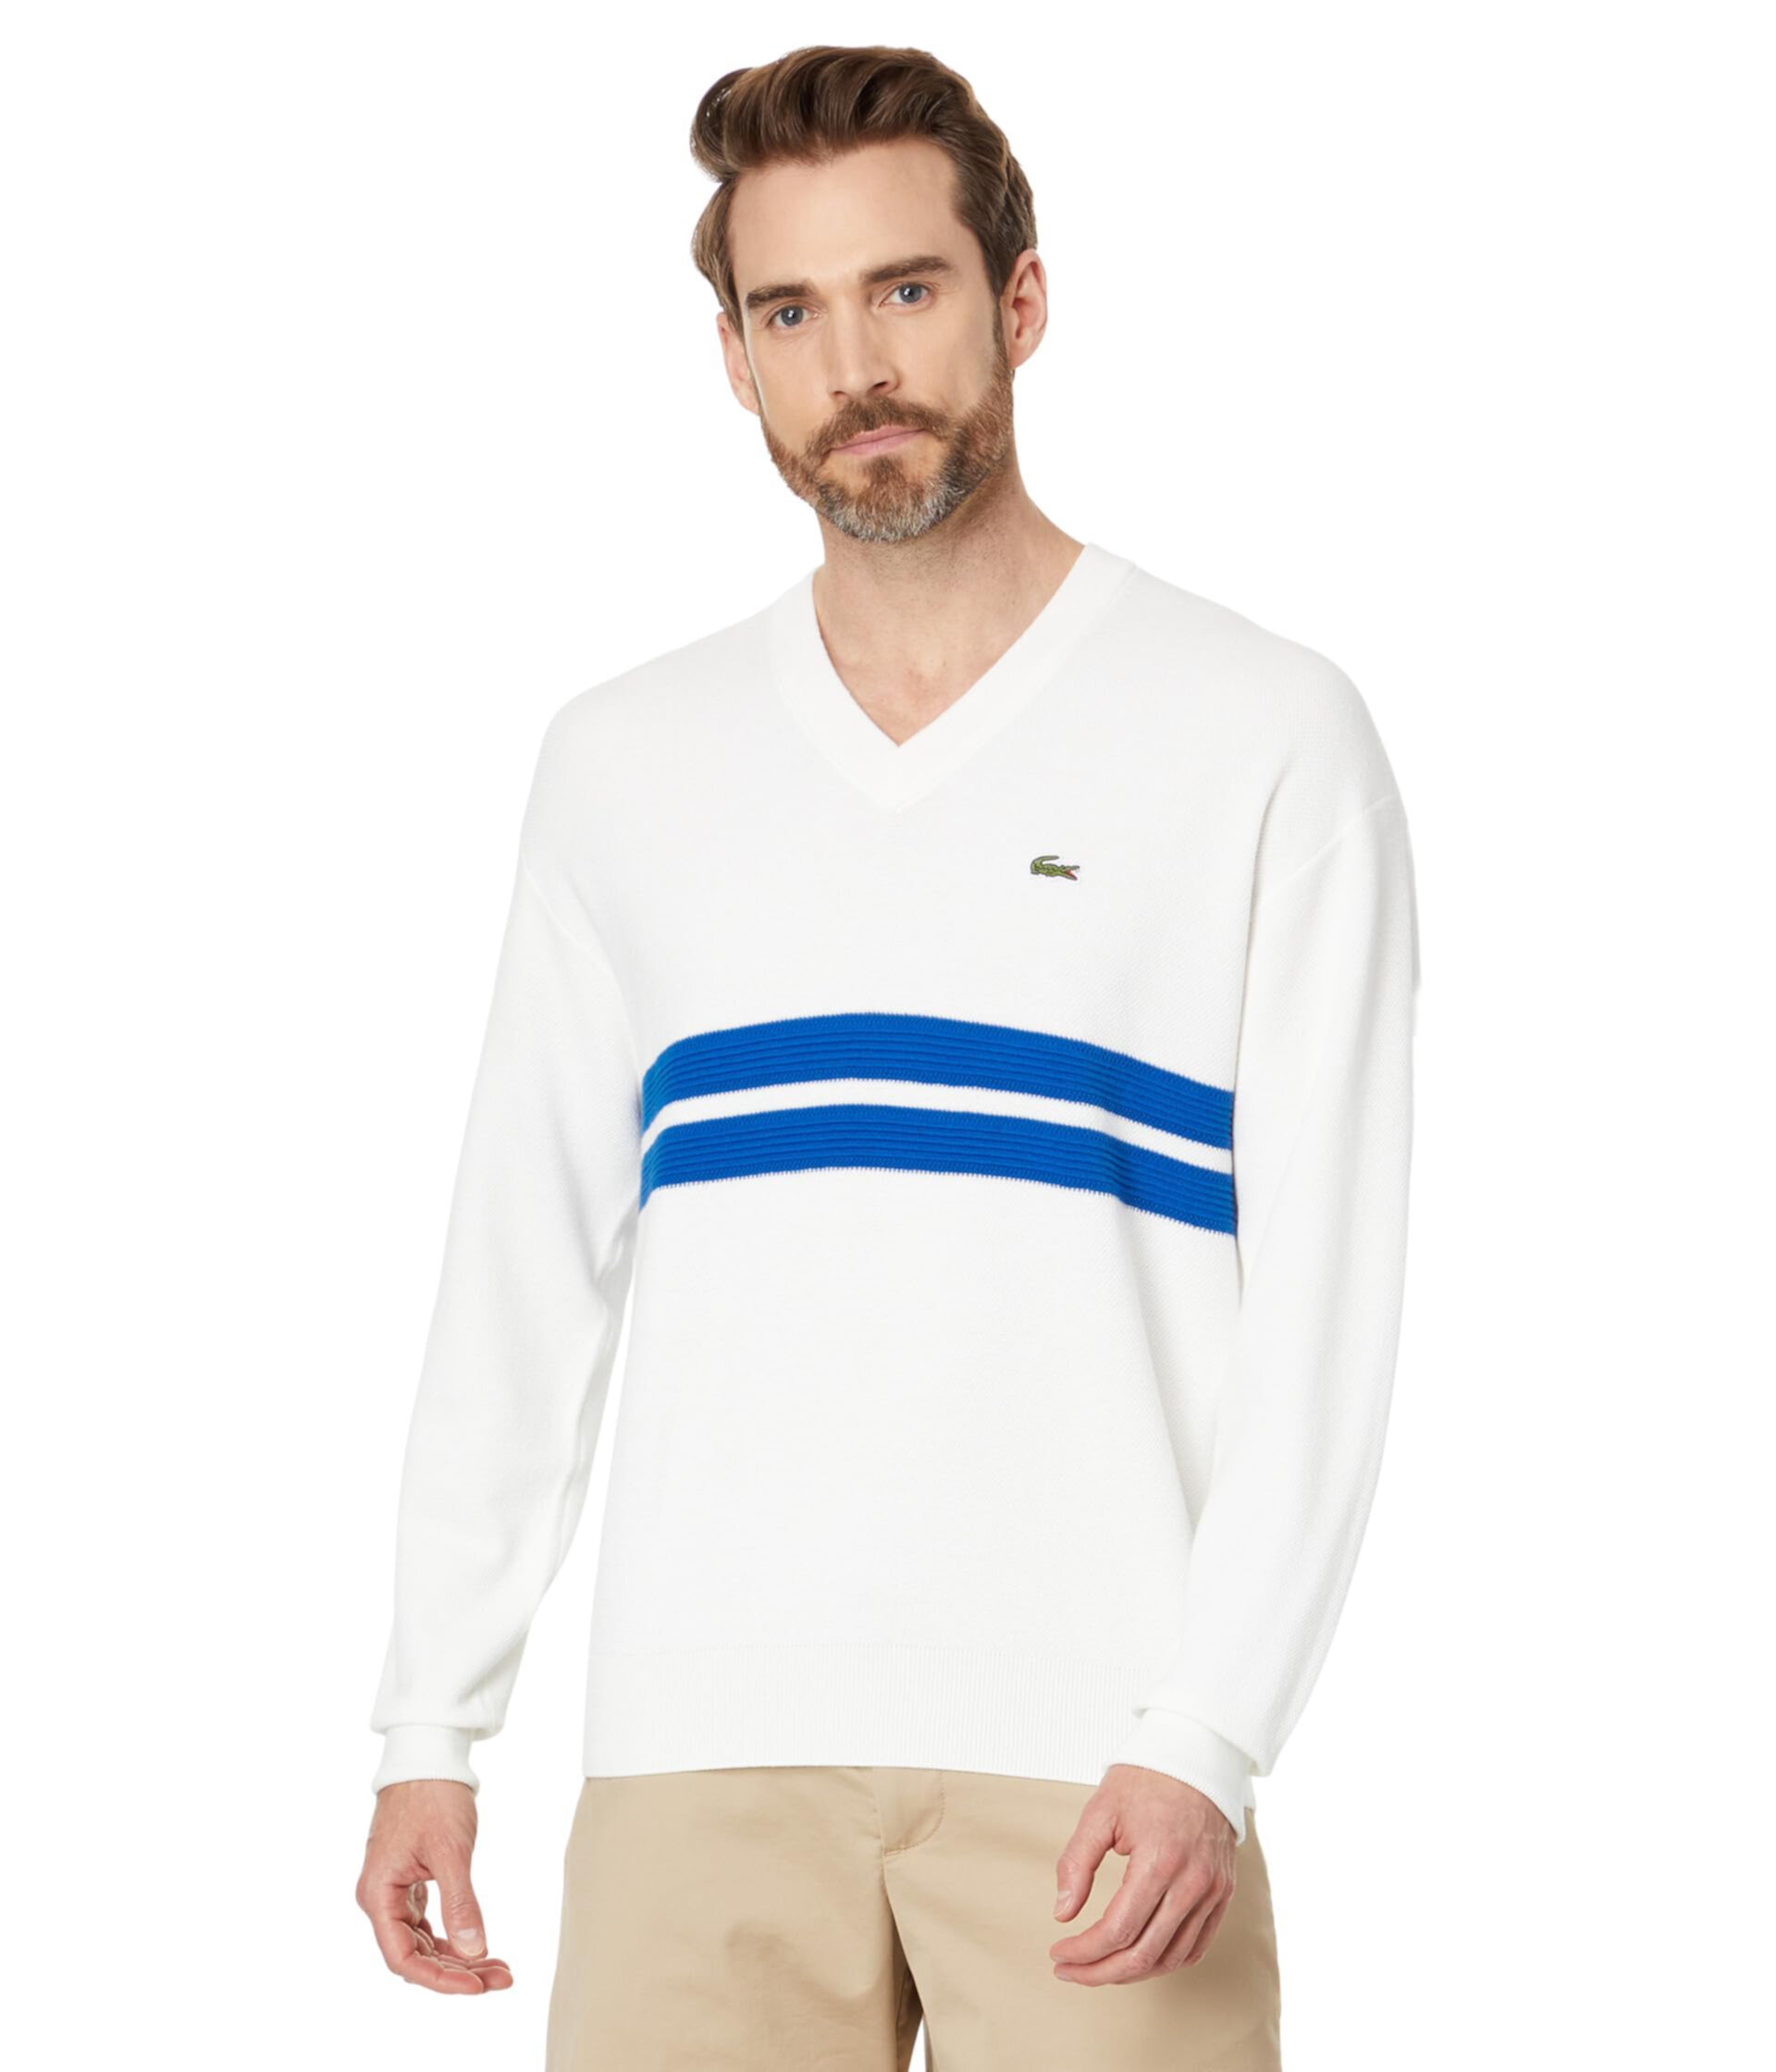 Long Sleeve Relaxed Fit V-Neck Sweater with Stripes Lacoste